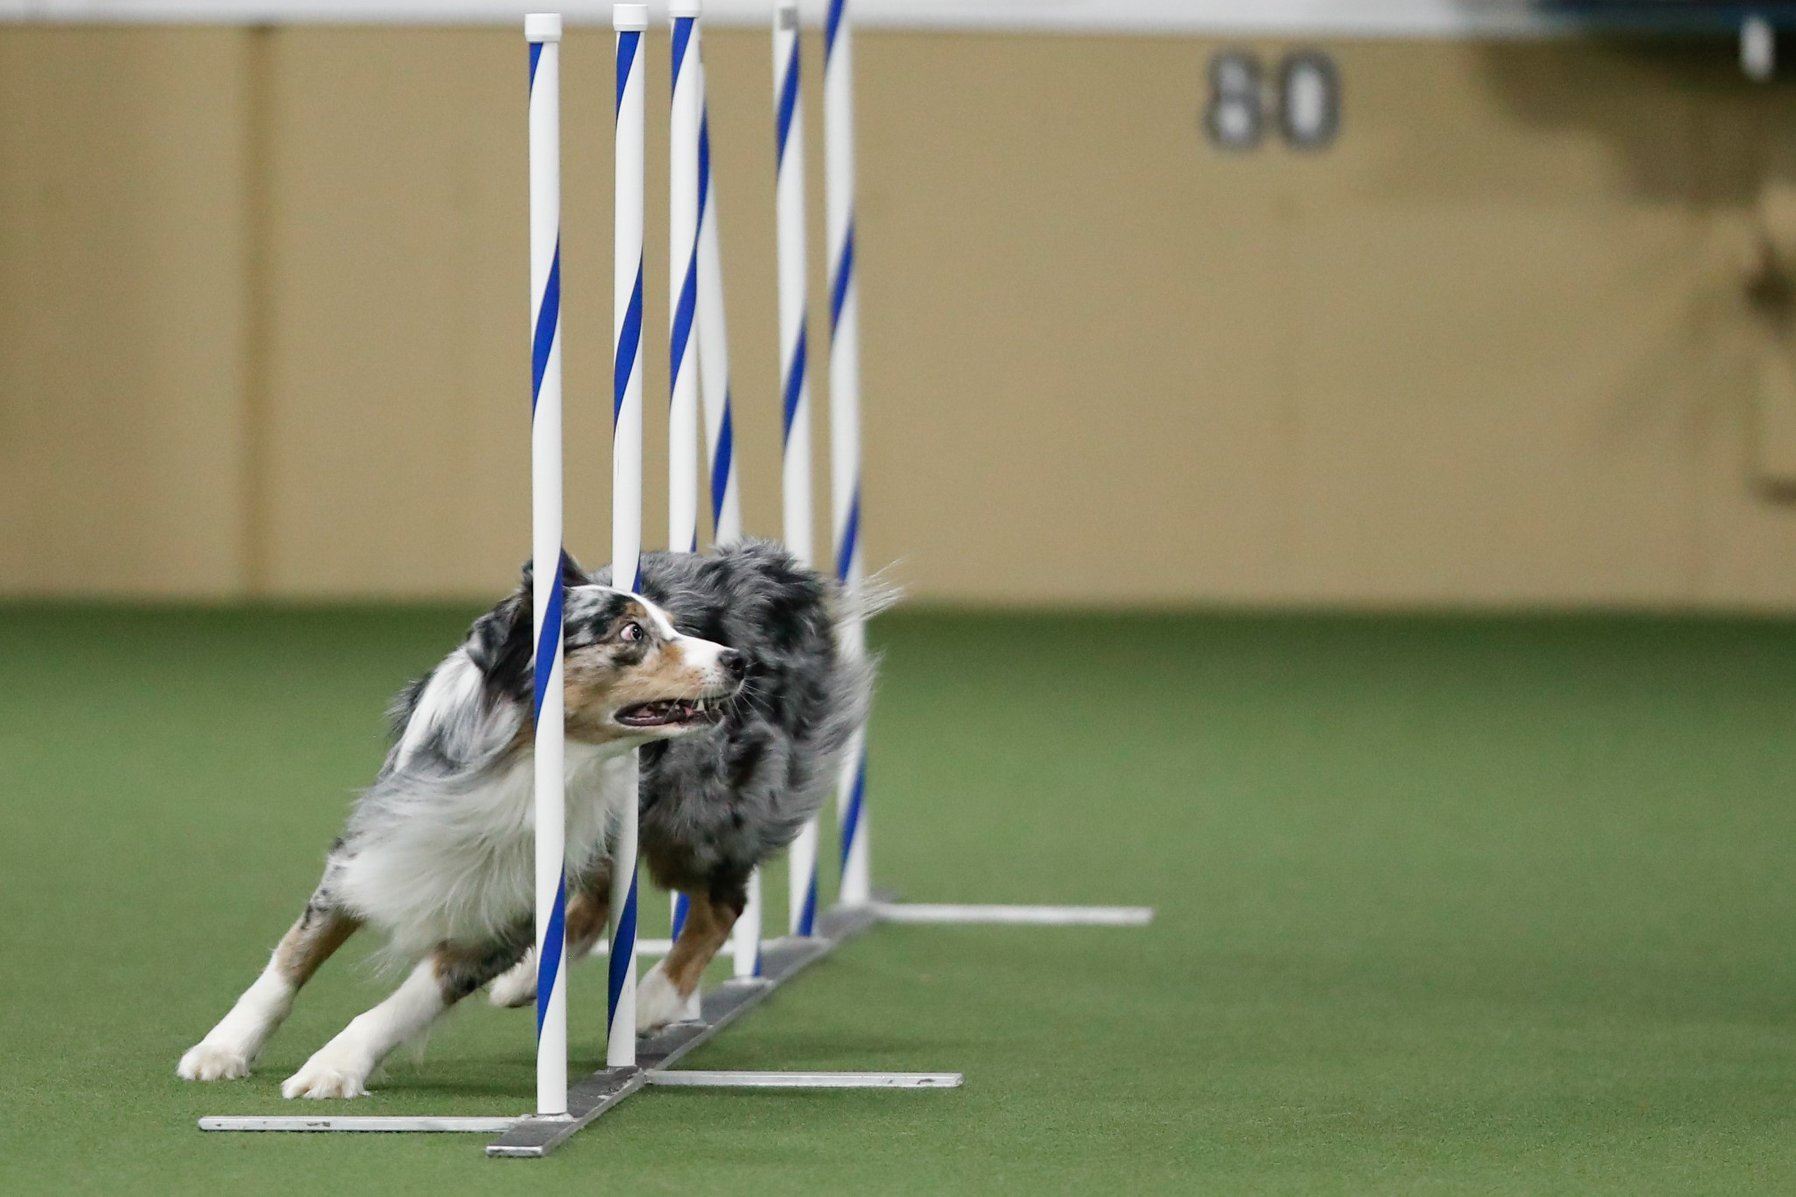 Dog weaving through obstacles